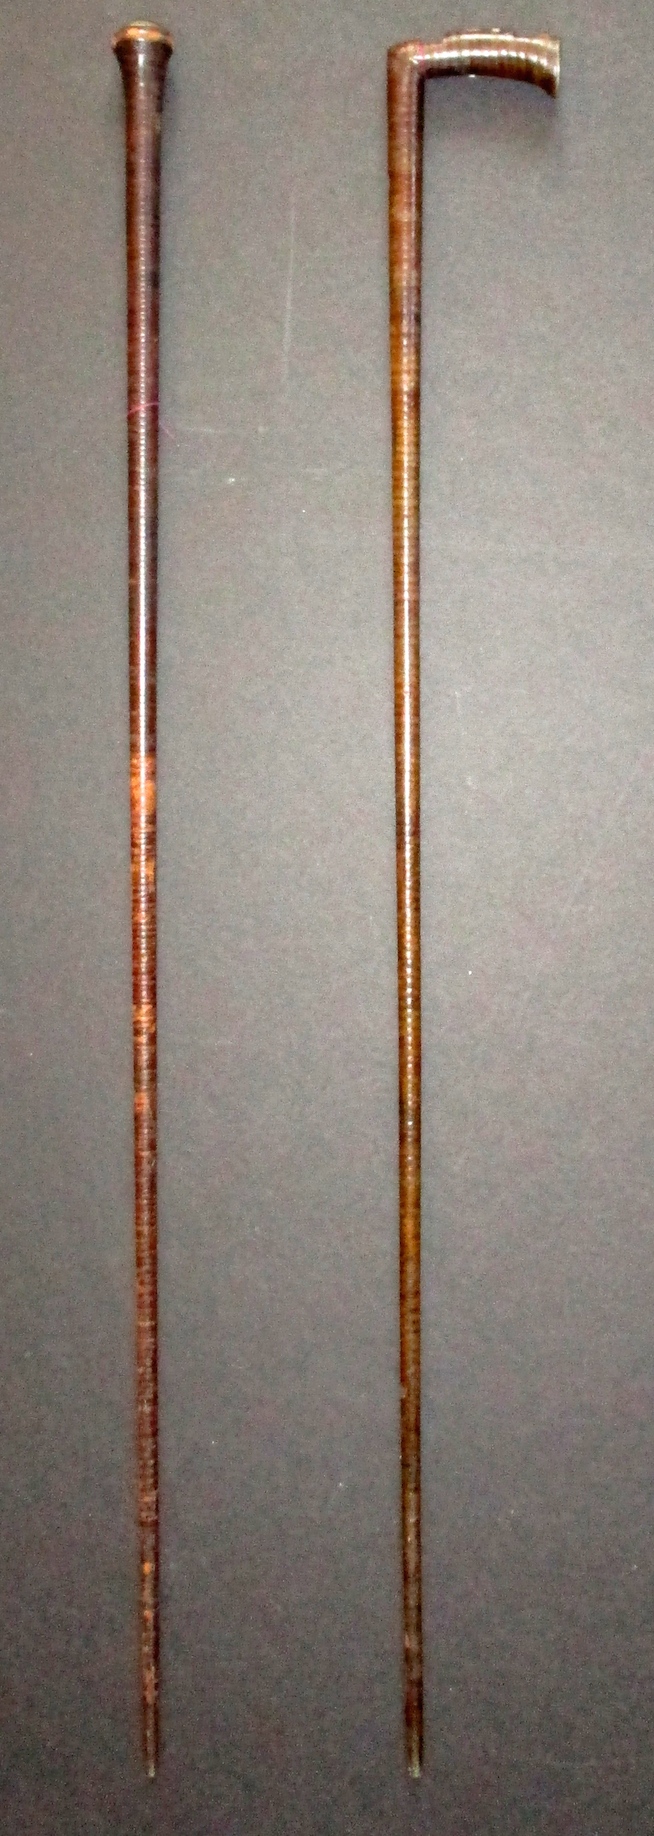 Leather Disk Cane and Walking Stick